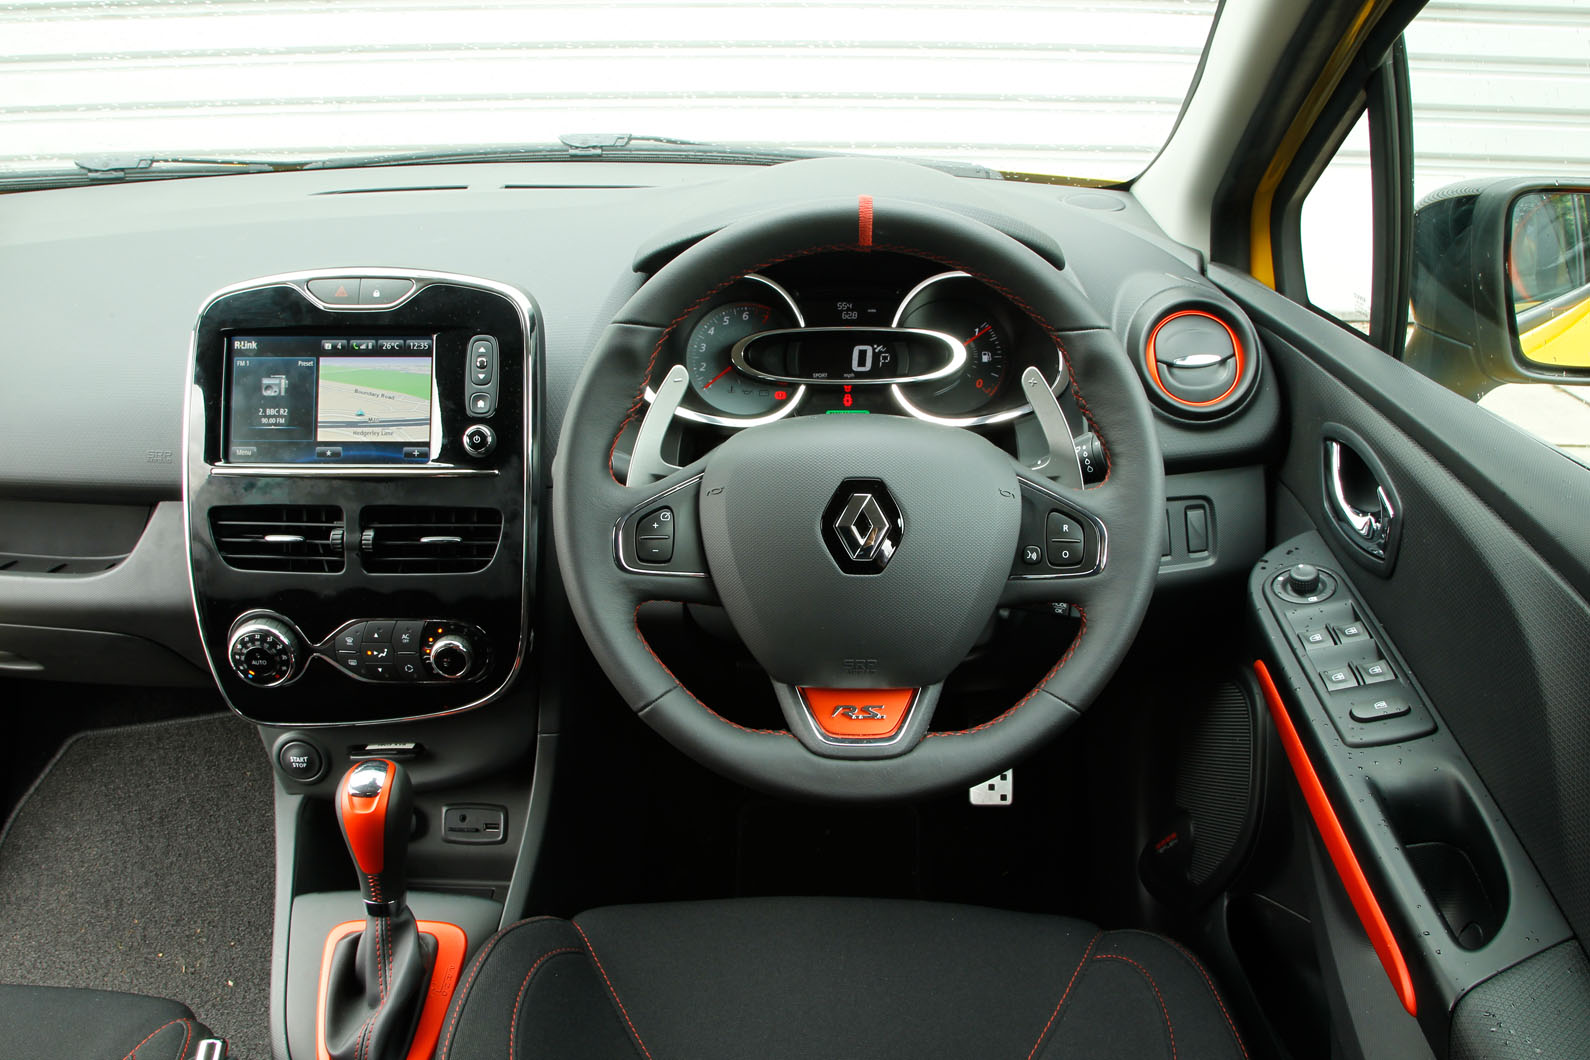 Renault Clio RS dashboard